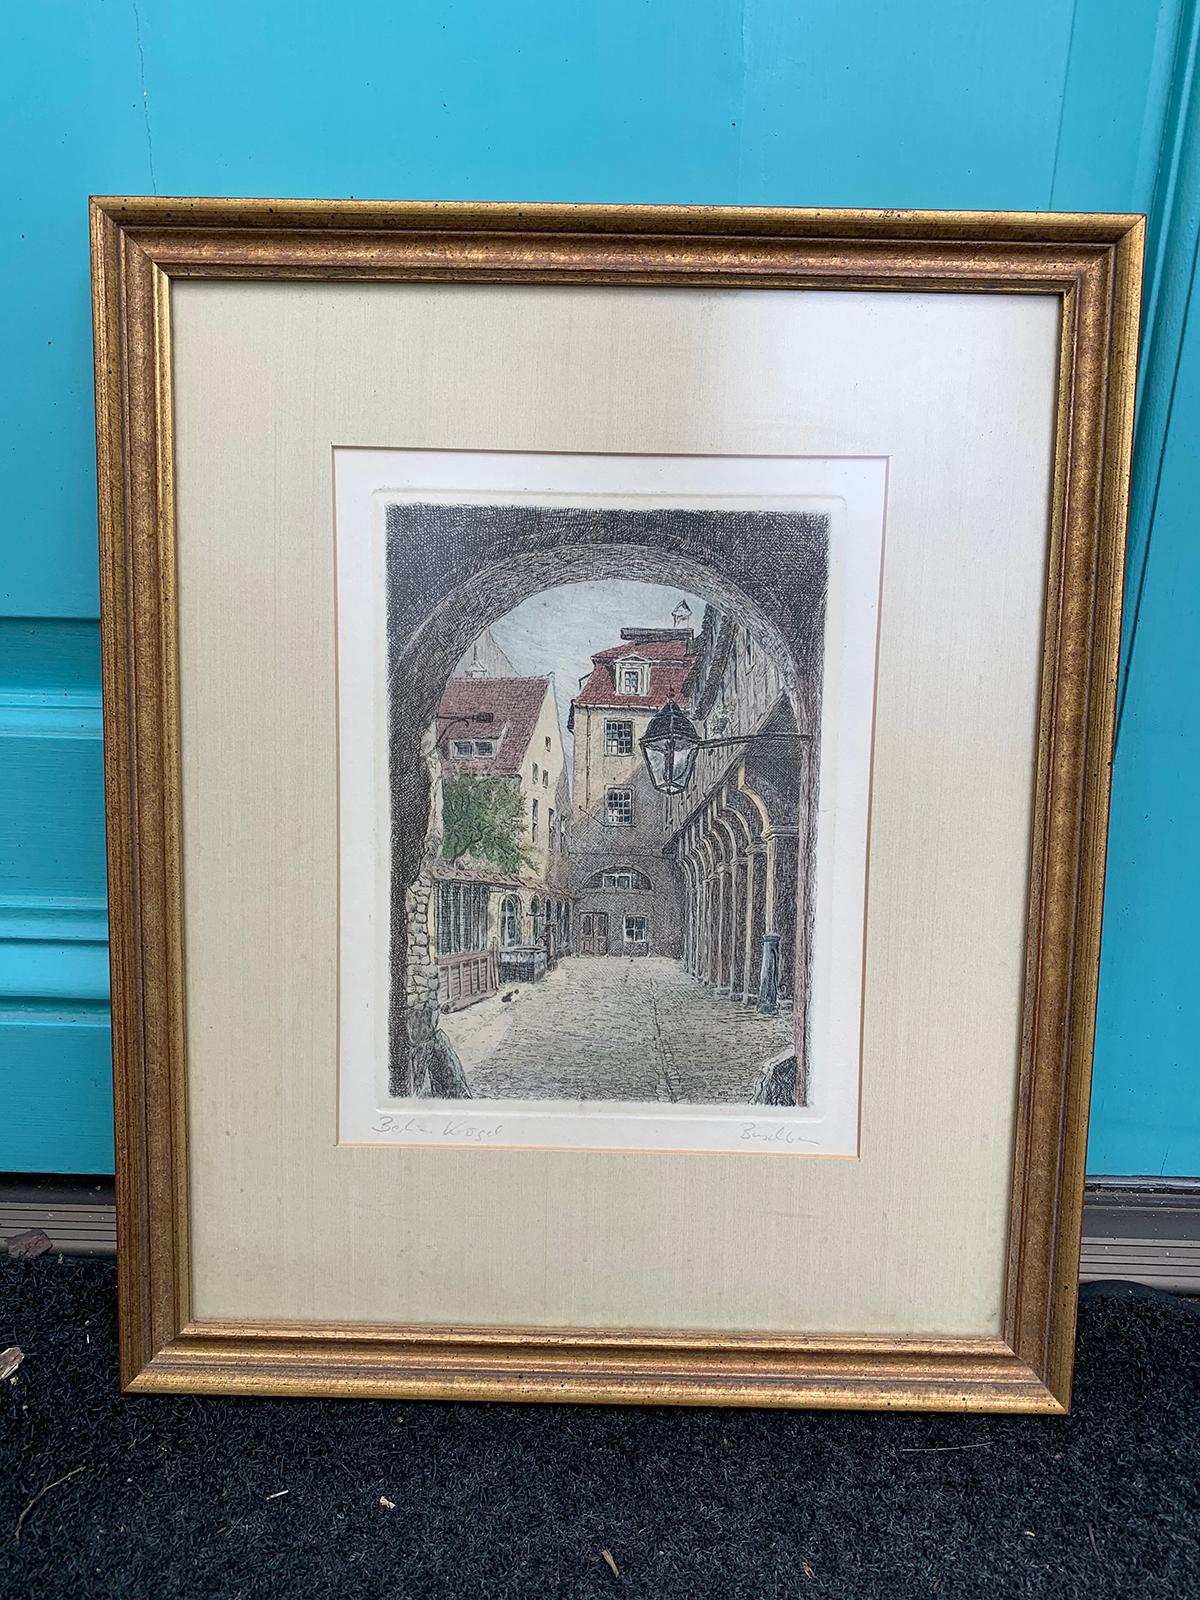 20th Century Etching of Town through Archway in Gilt Frame, Signed Buschbaum In Good Condition For Sale In Atlanta, GA